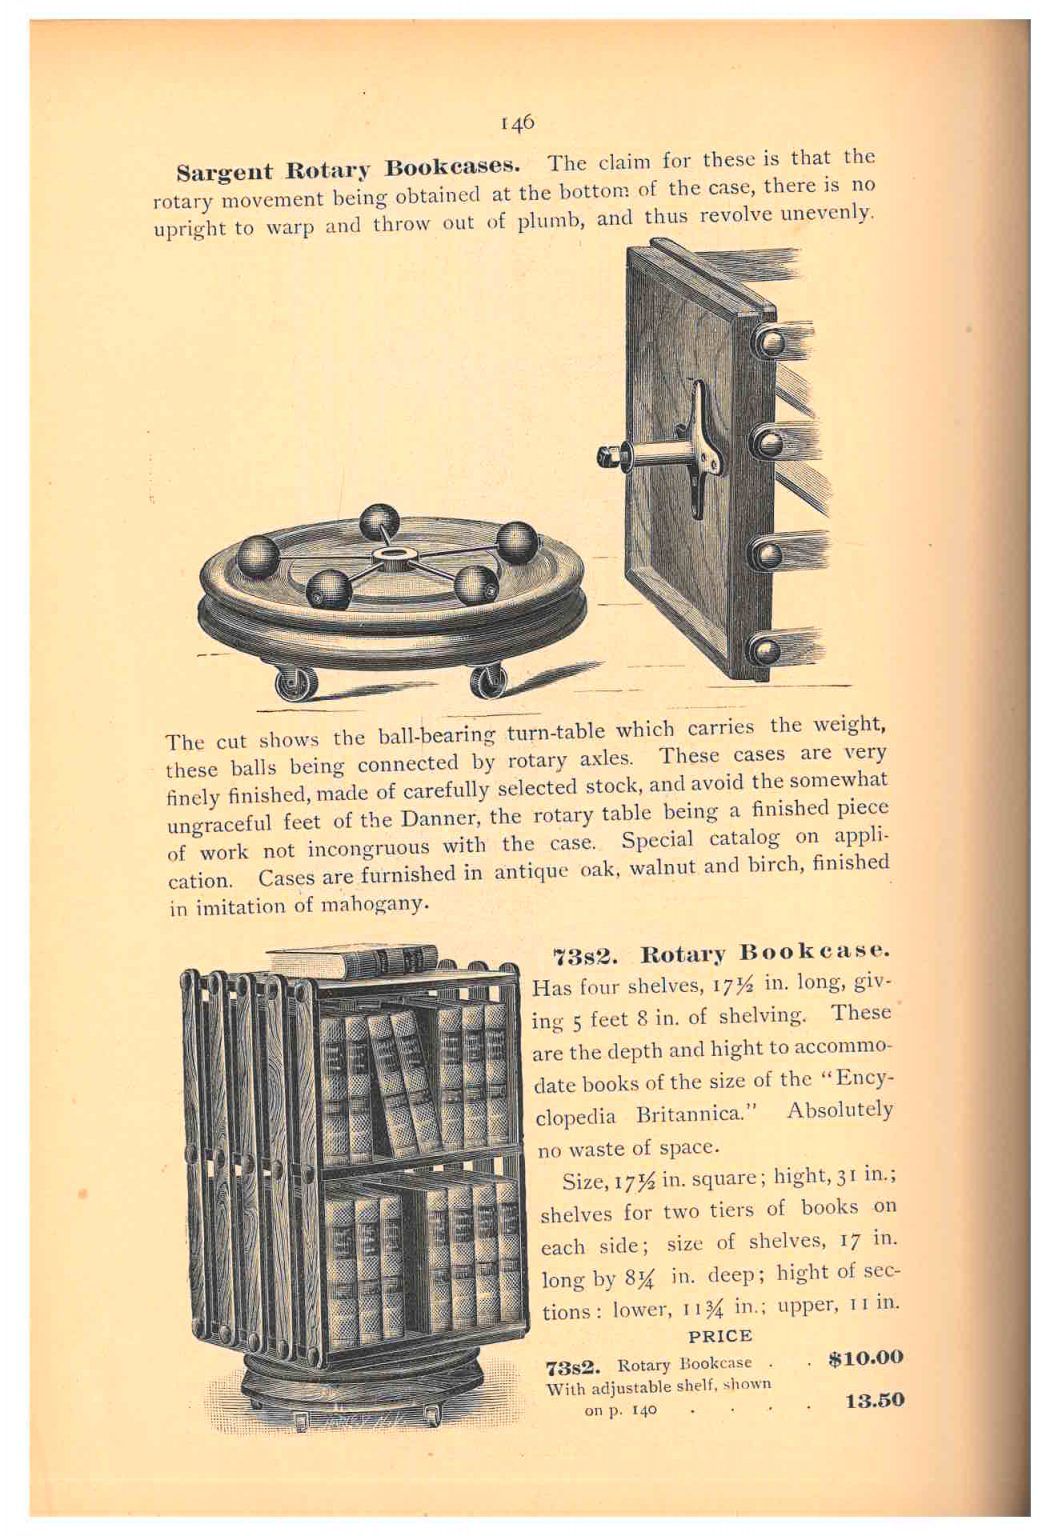 Trade catalog illustration of a revolving book case and the mechanism that spins it.